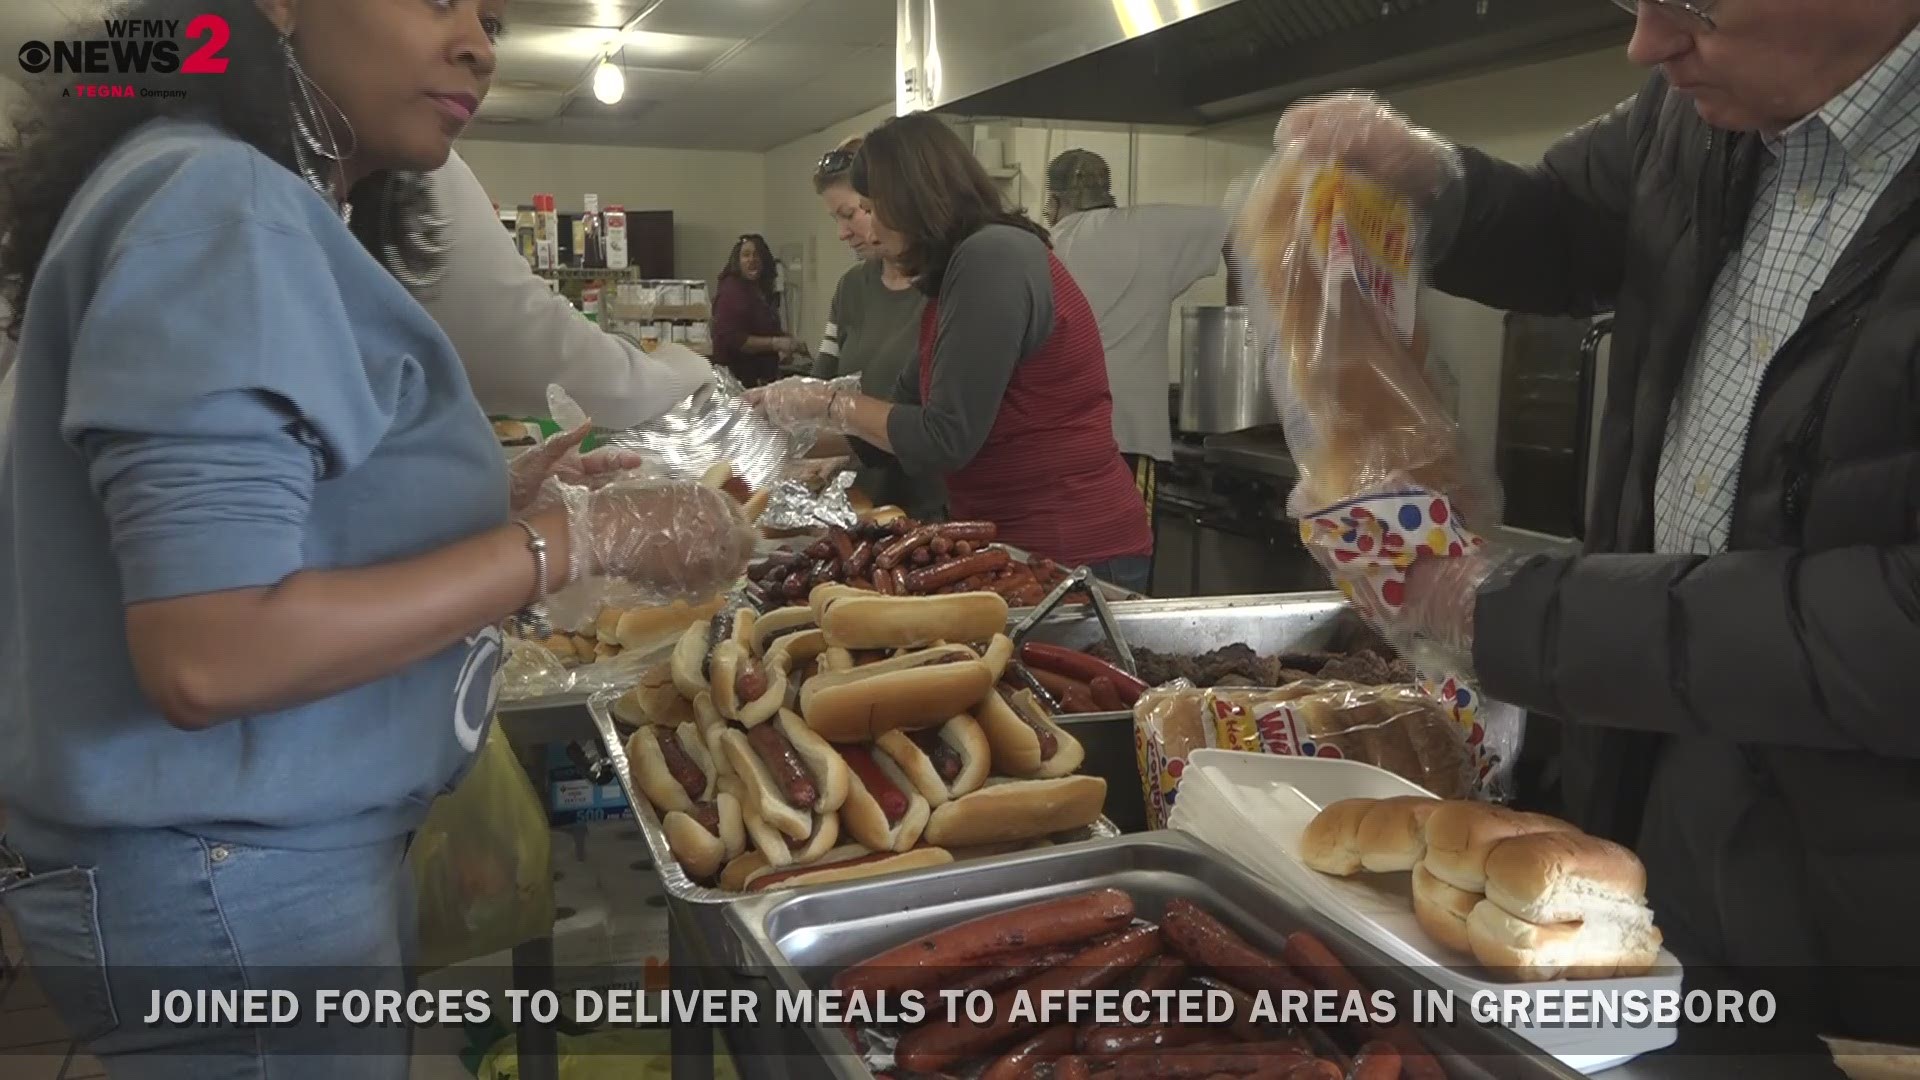 Members of the Greensboro community rallied to feed families impacted by Sunday's severe weather